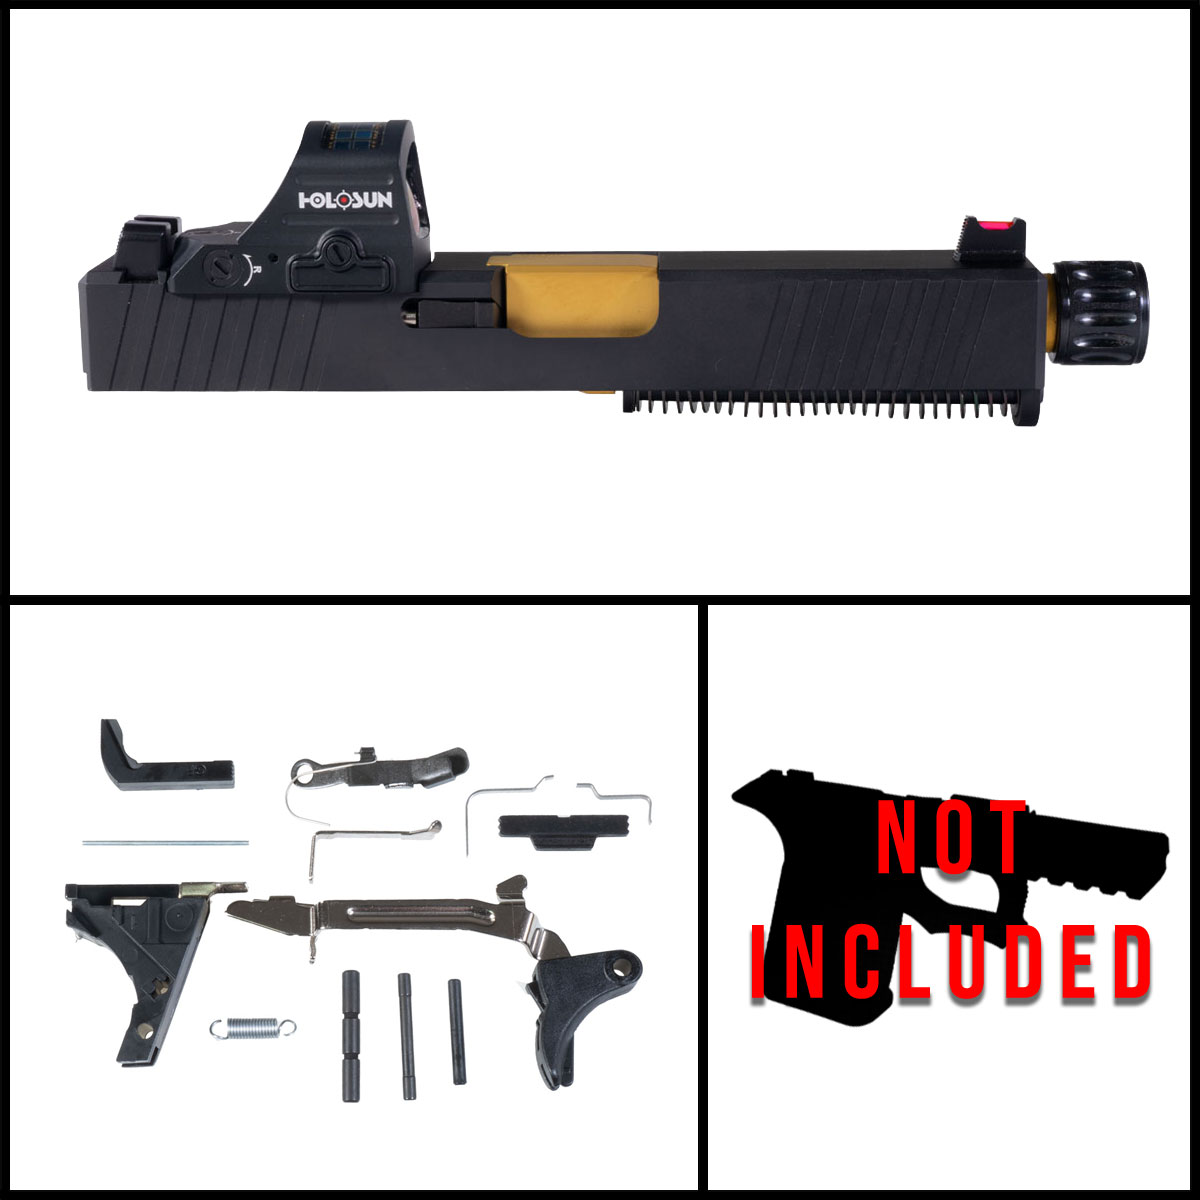 DD 'Cogito w/ HS507C-X2 Red Dot' 9mm Full Pistol Build Kit (Everything Minus Frame) - Glock 19 Gen 1-3 Compatible